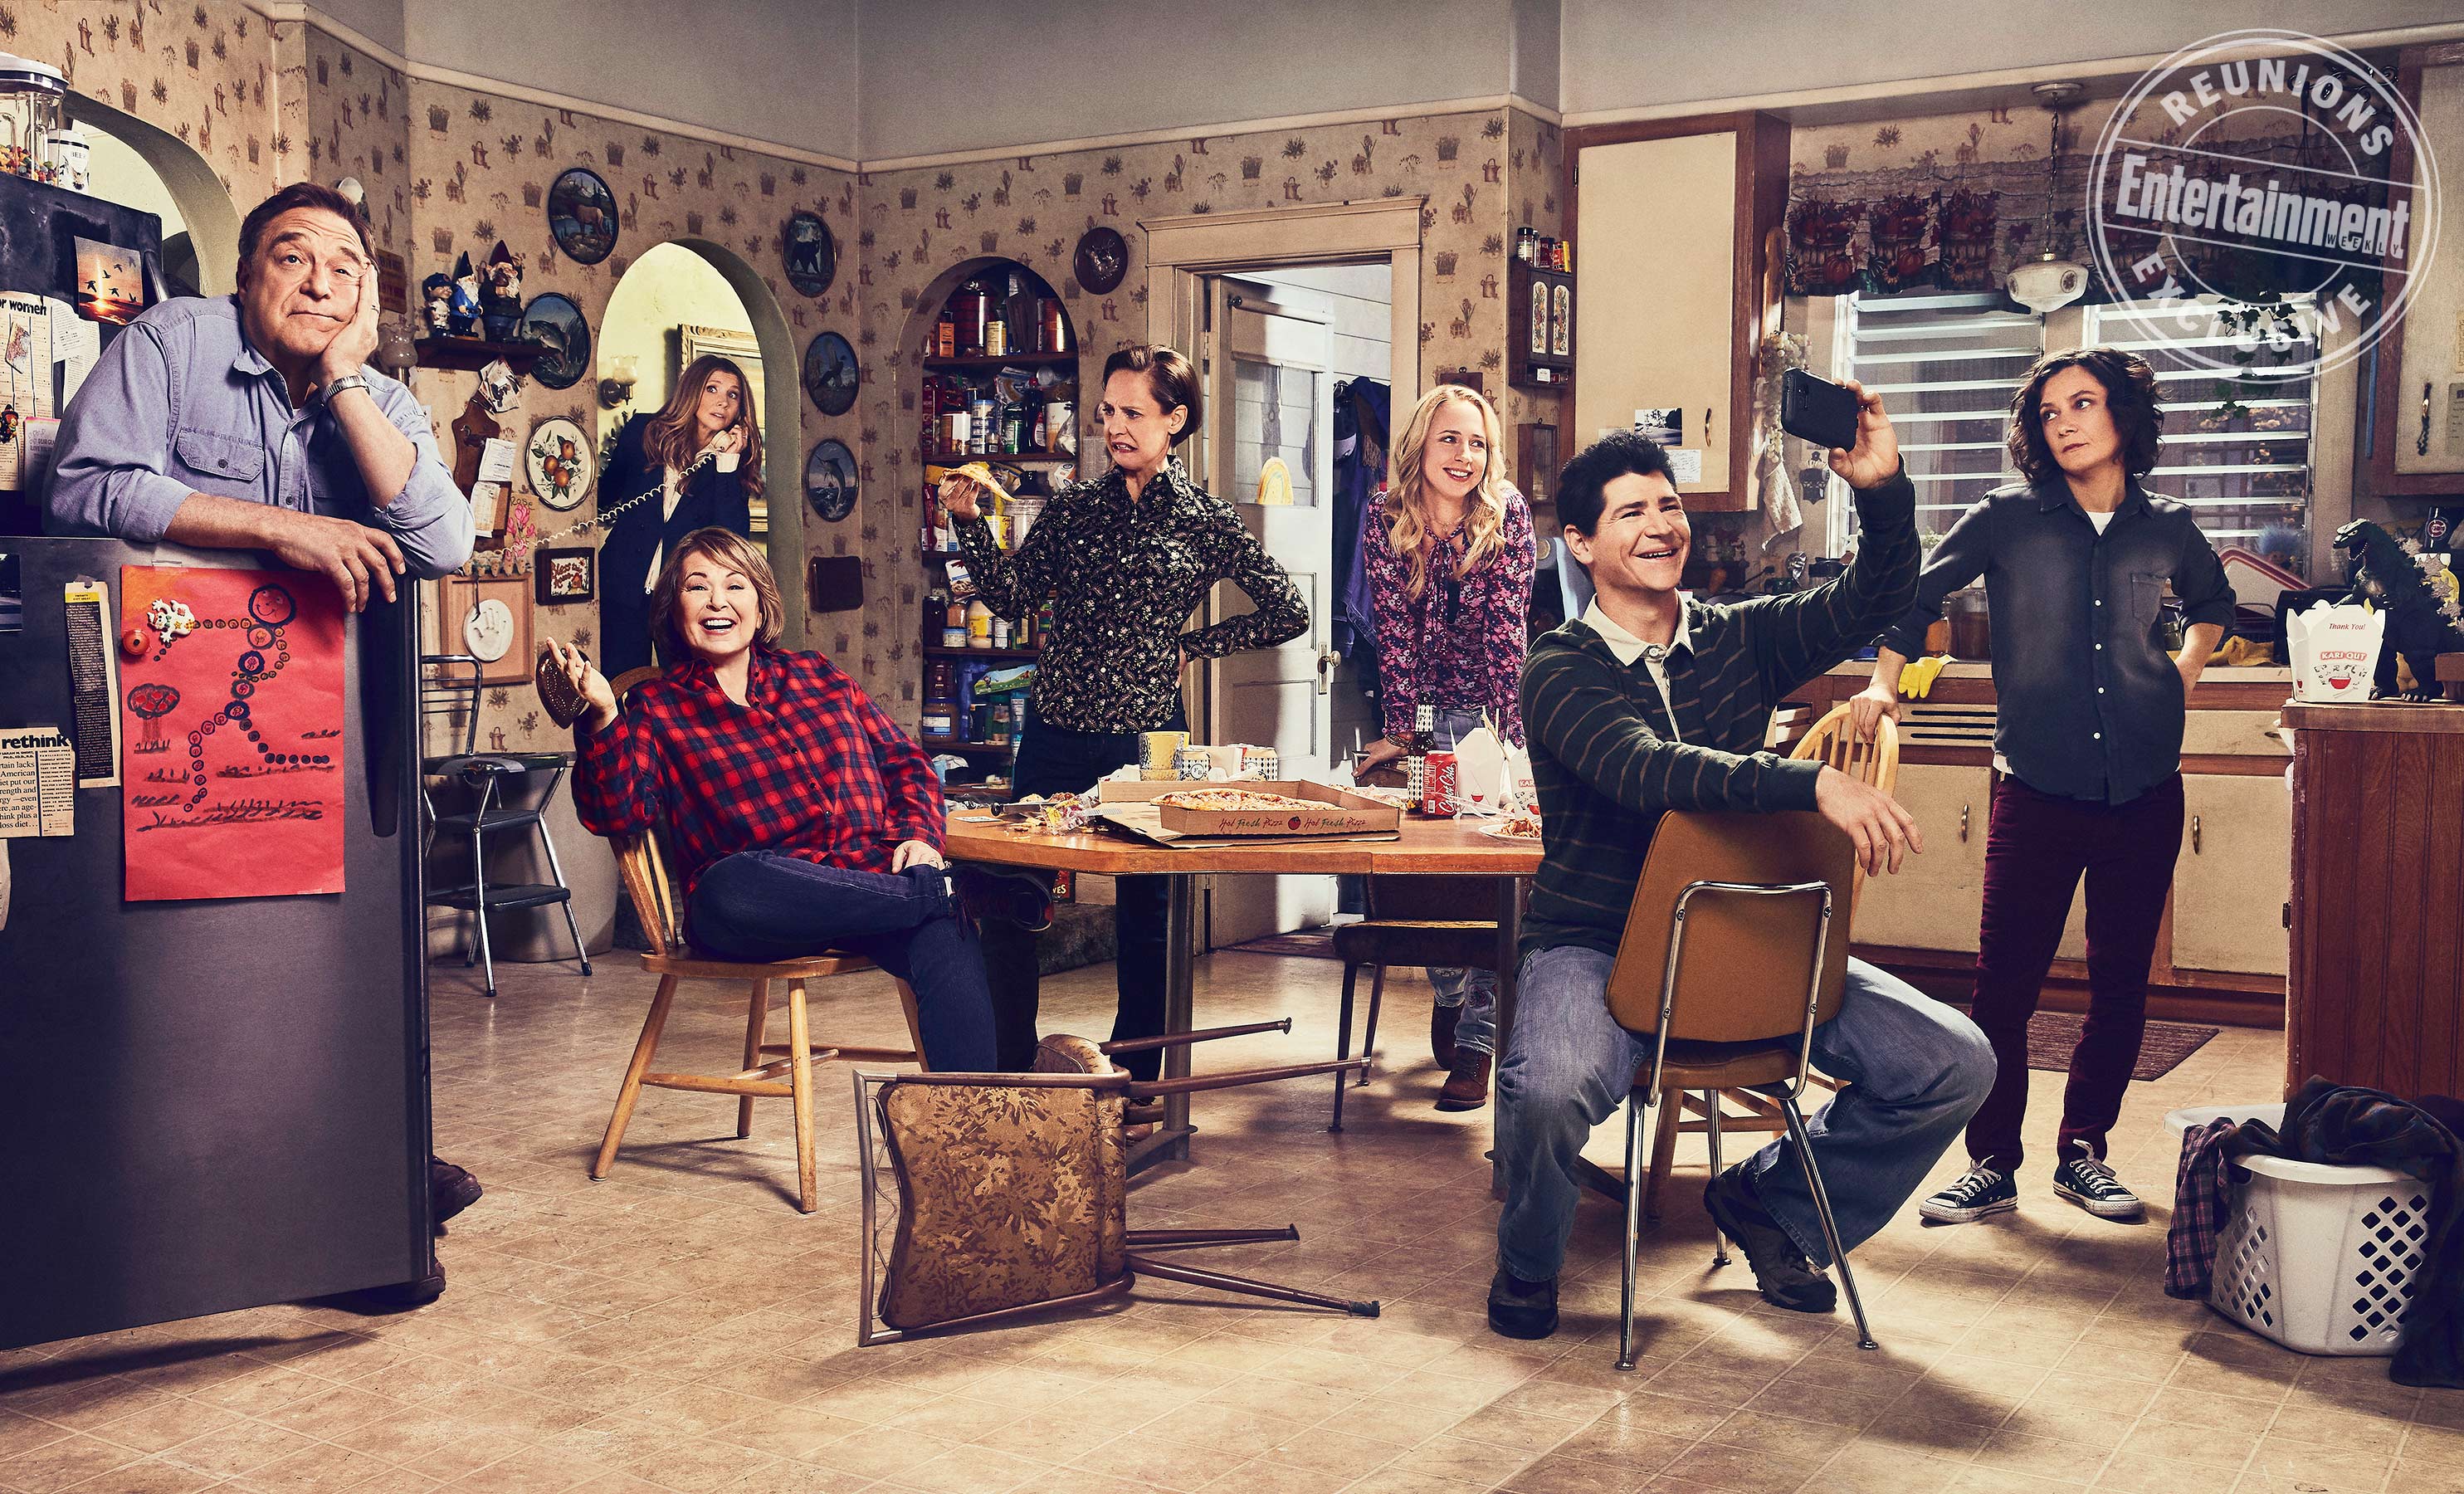 Roseanne Revival New Image Of The Ew